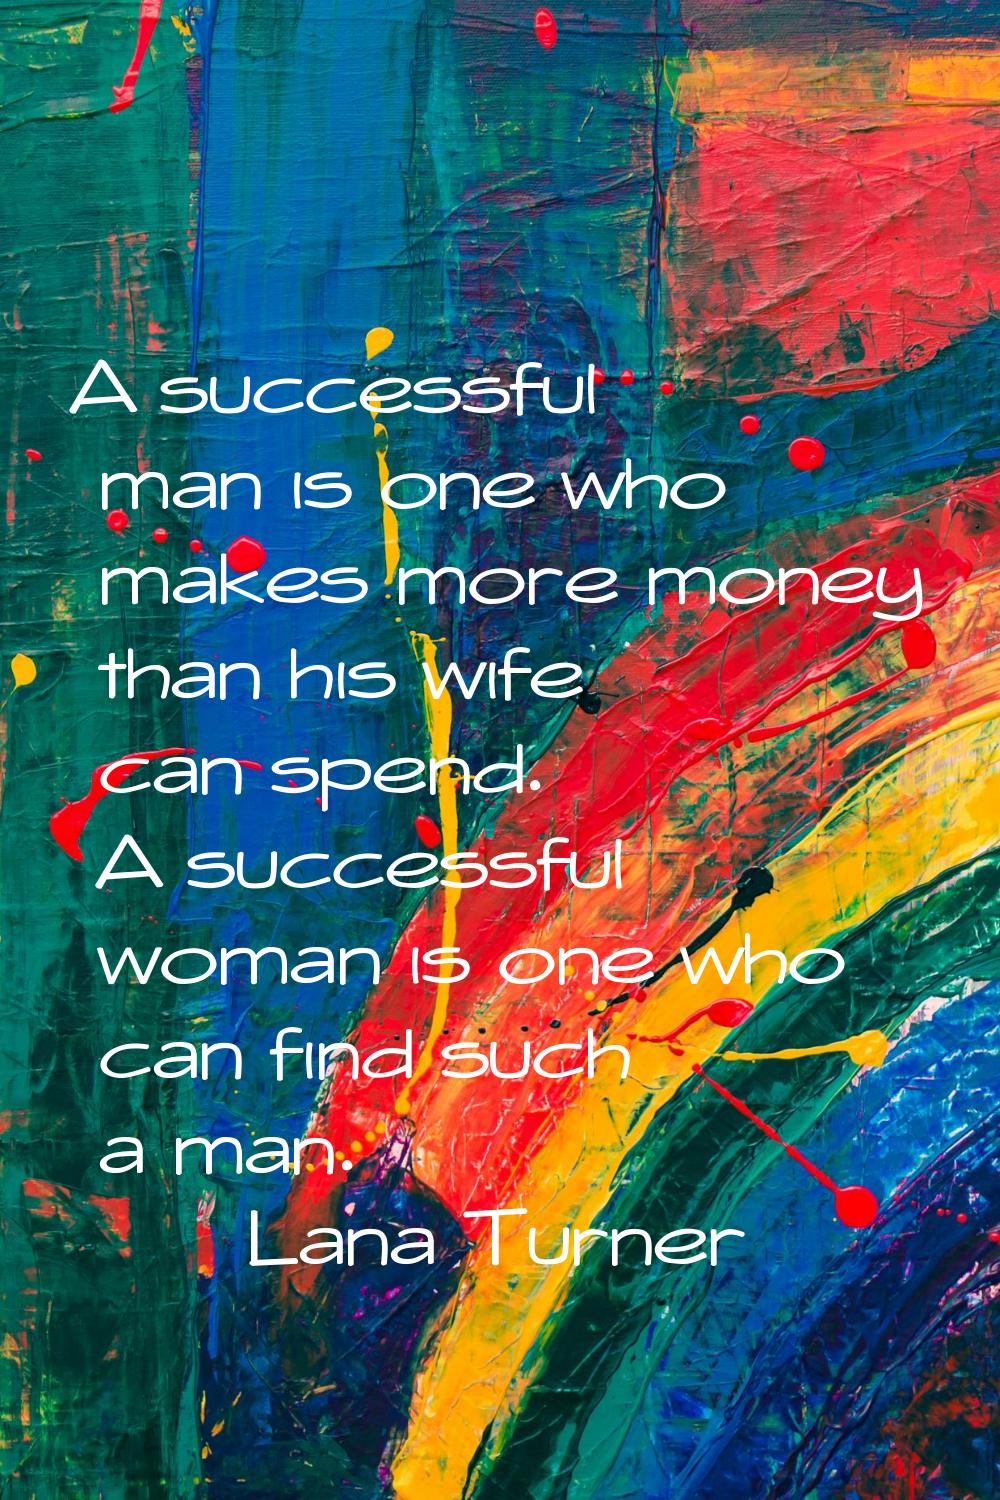 A successful man is one who makes more money than his wife can spend. A successful woman is one who